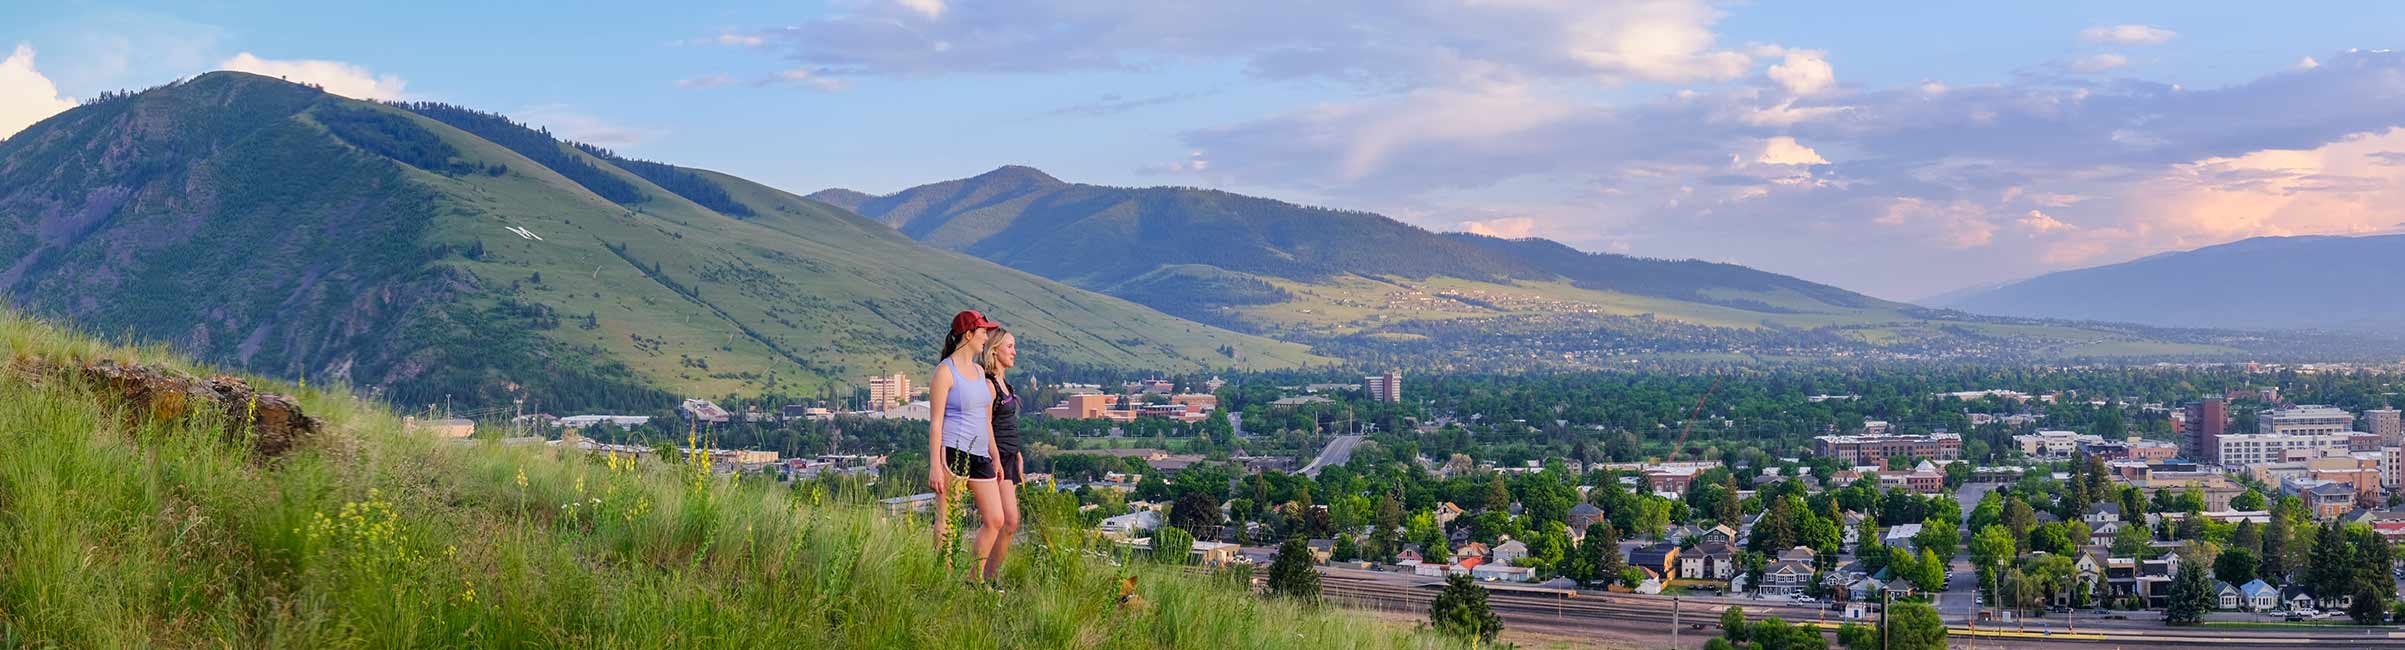 Planning Your Girls Weekend in Missoula